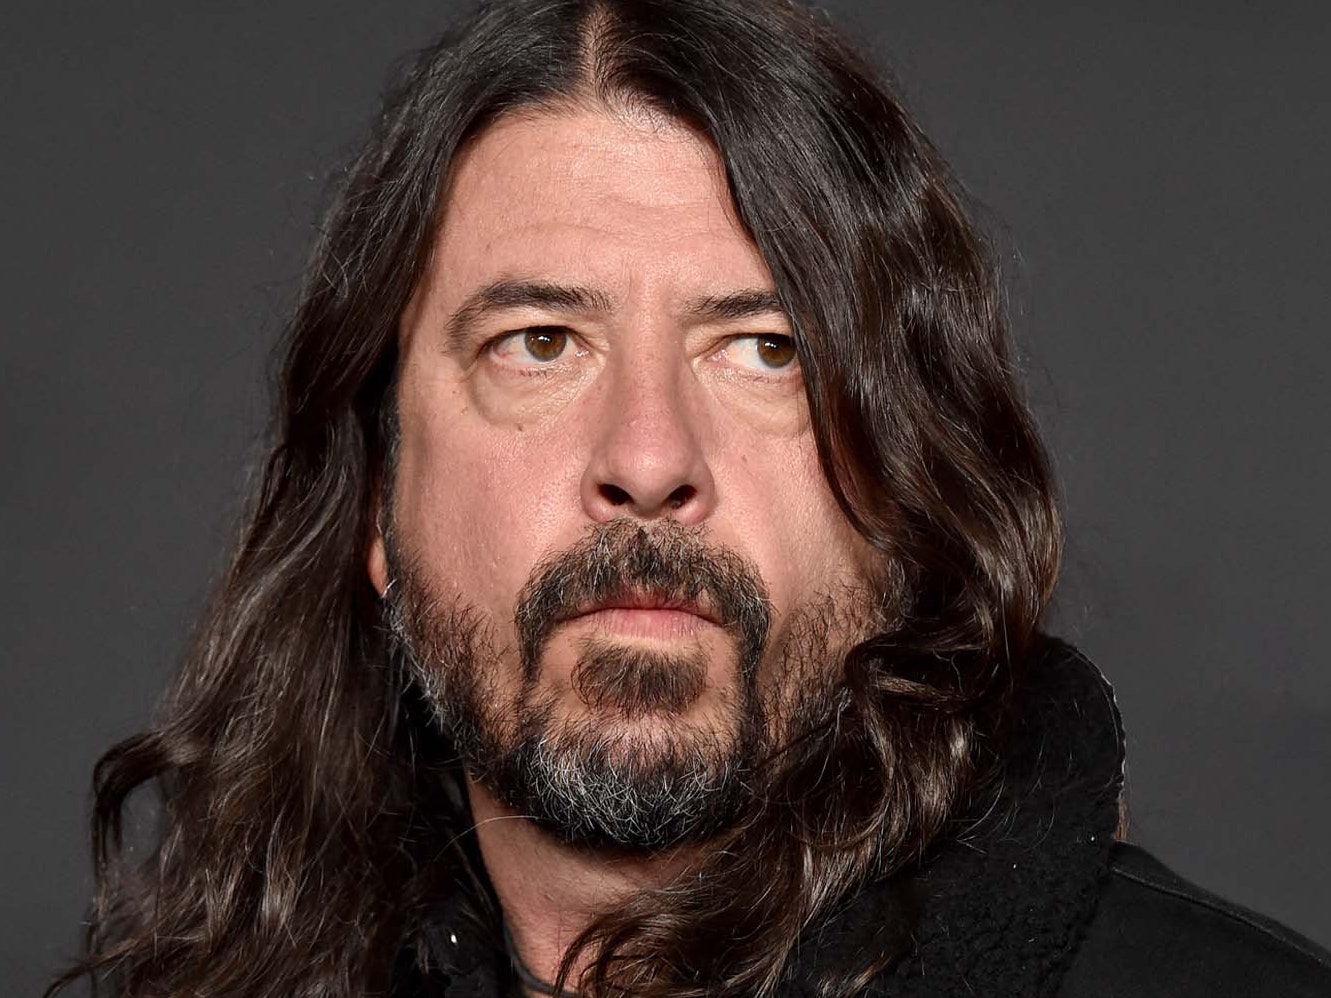 Foo Fighters Rock Through the Pain Once Again